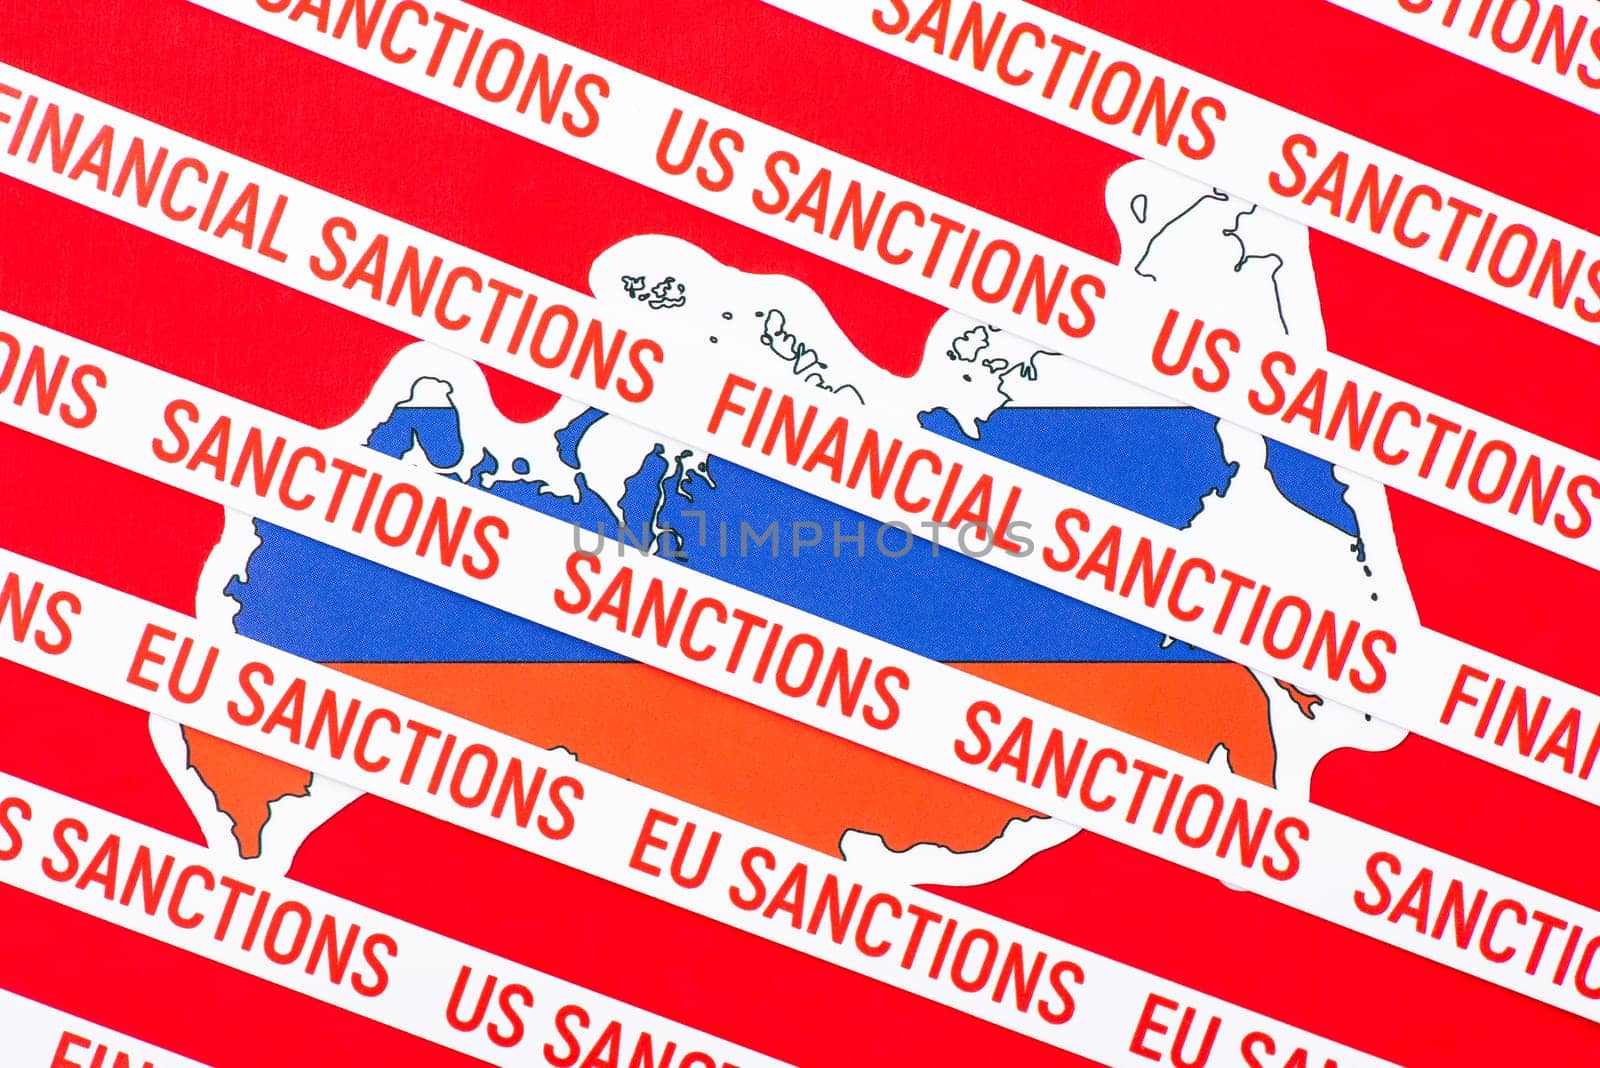 Concept of international isolation of Russia, sanctions on Russia because of Ukraine invasion